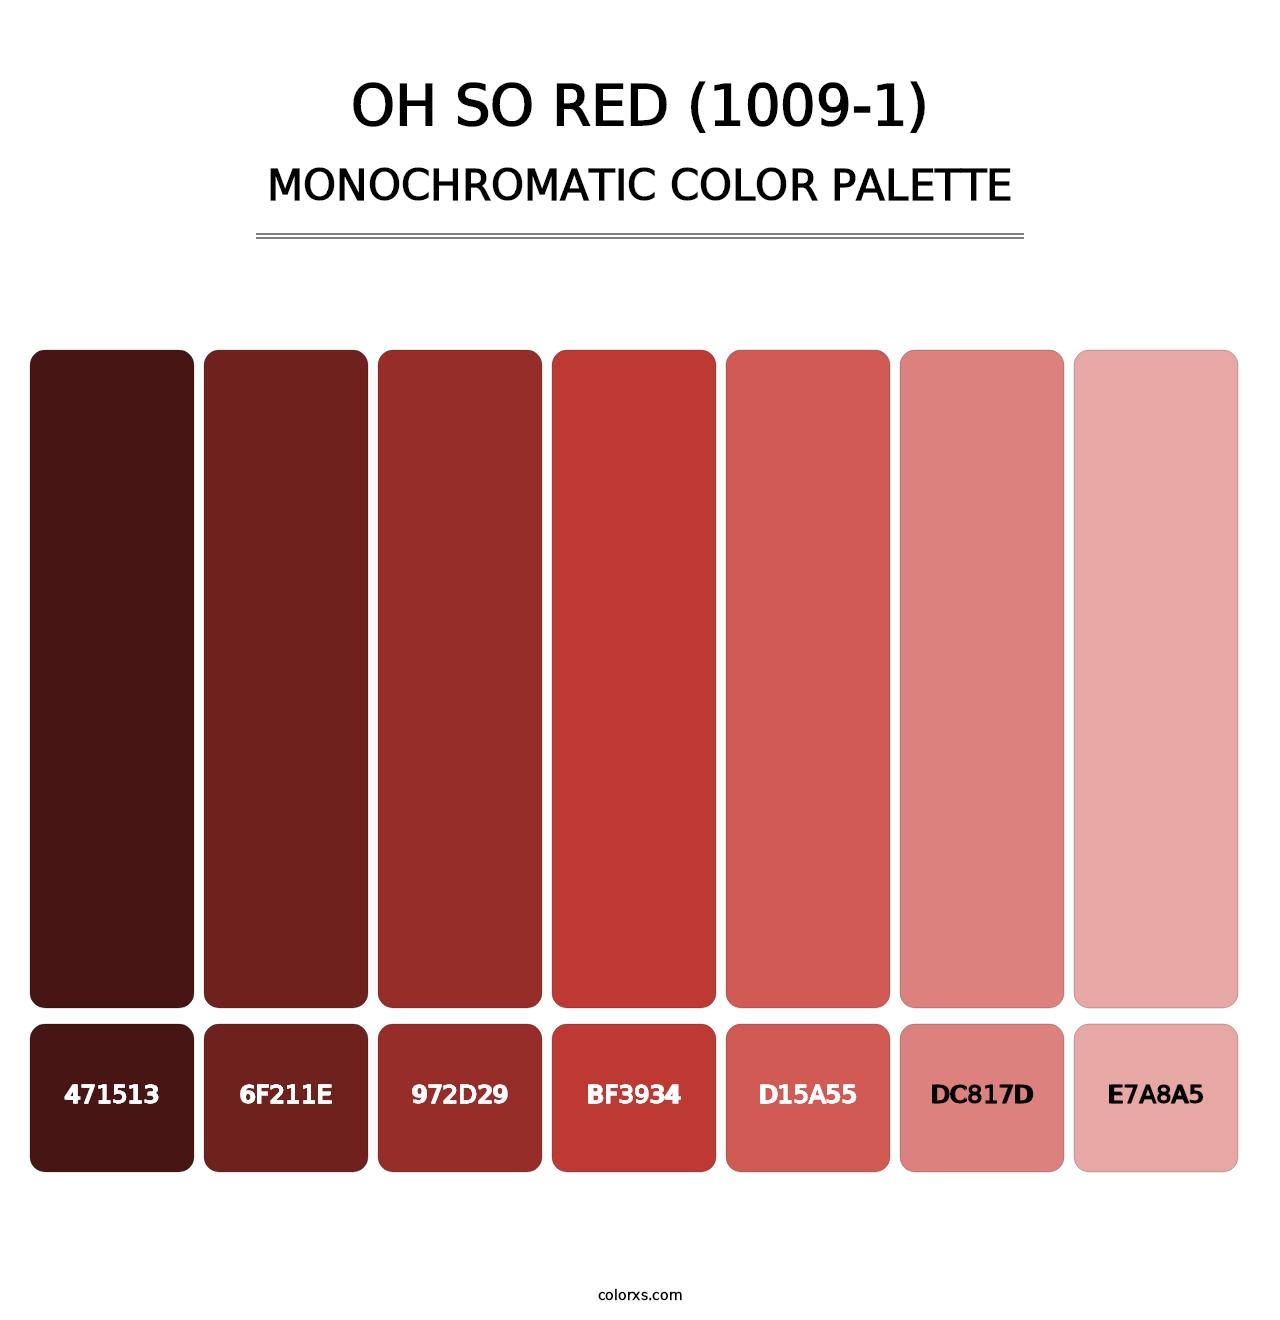 Oh So Red (1009-1) - Monochromatic Color Palette